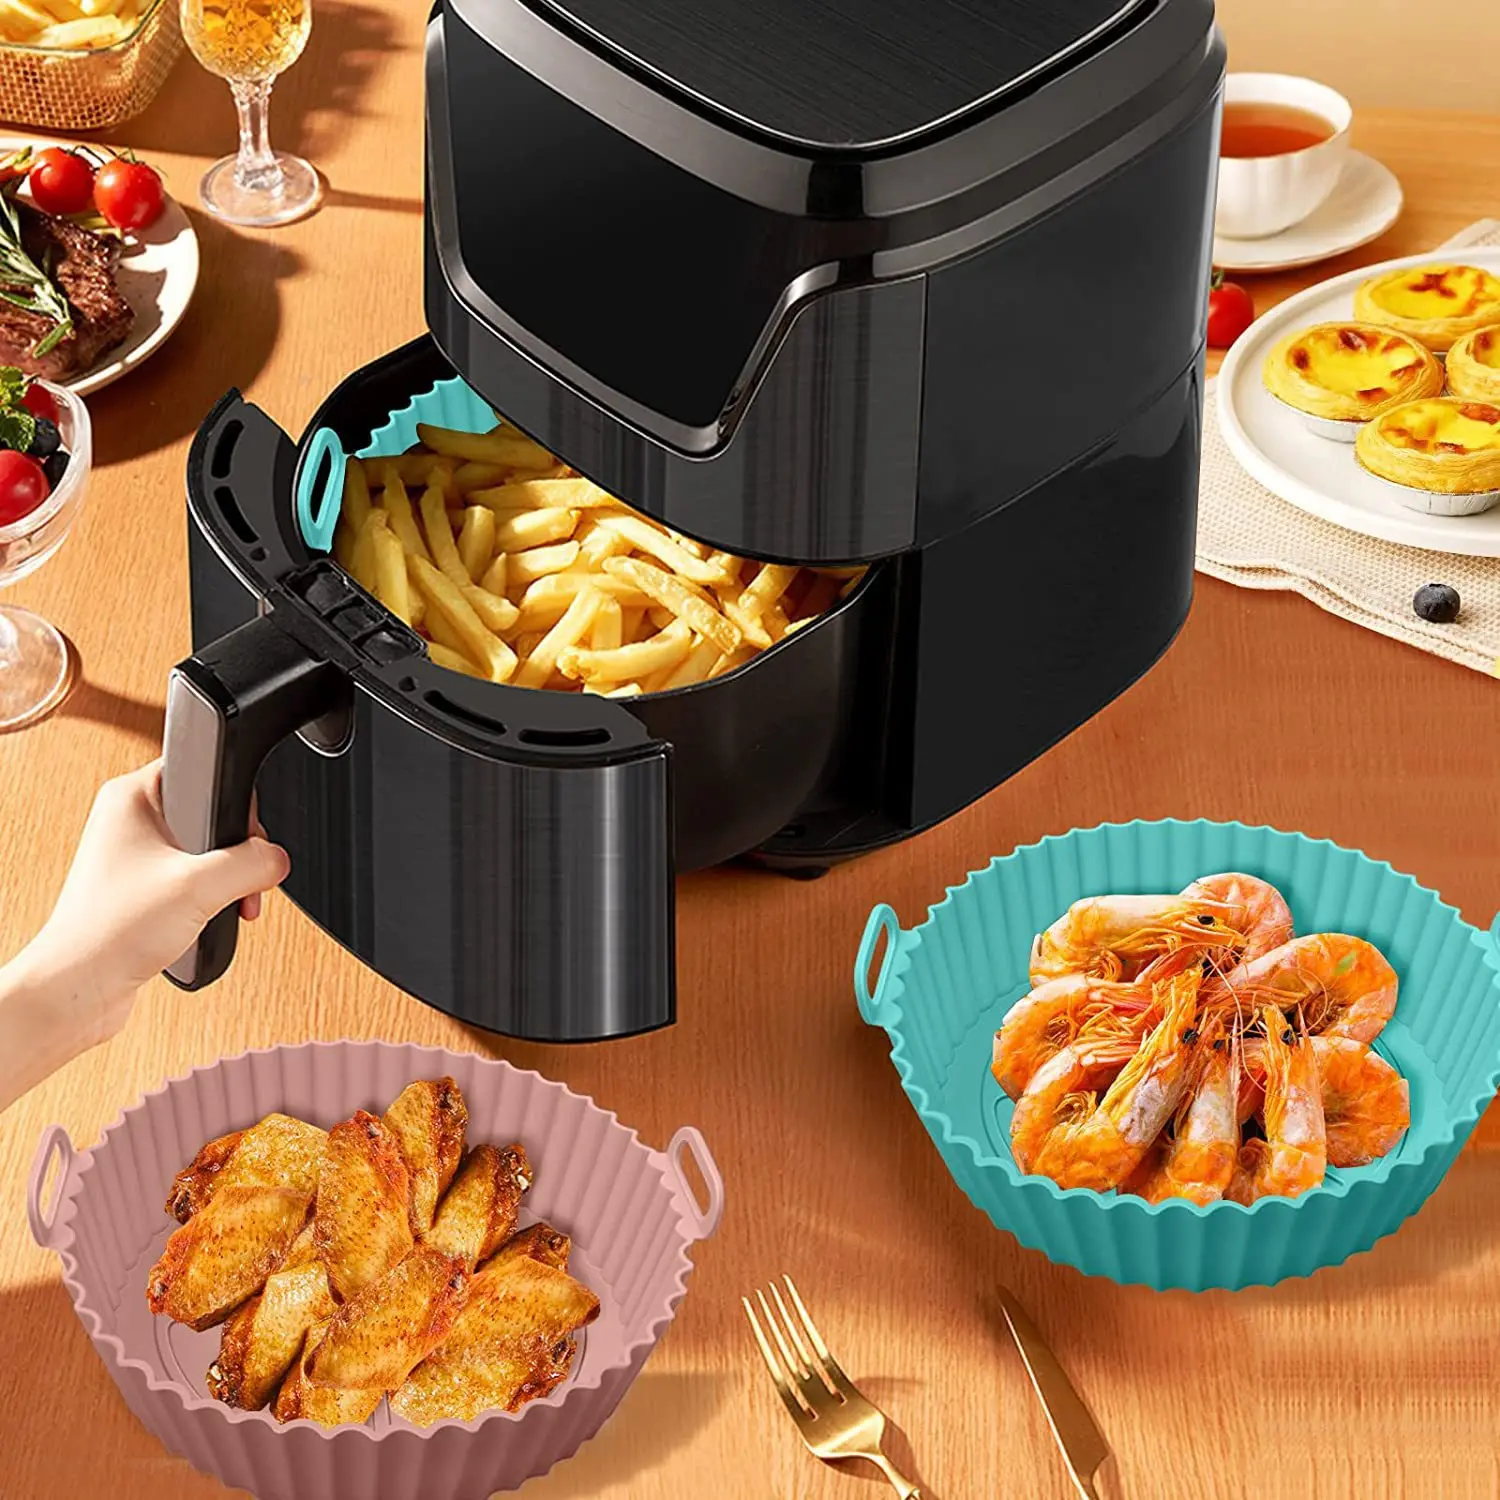 https://ae01.alicdn.com/kf/S06d6a7dc906d4173b80ece0945f4f880t/Air-Fryer-Silicone-Pan-Air-Fryer-Oven-Pizza-Fried-Chicken-Air-Fryer-Accessories-Disc-Reusable-Replacement.jpg